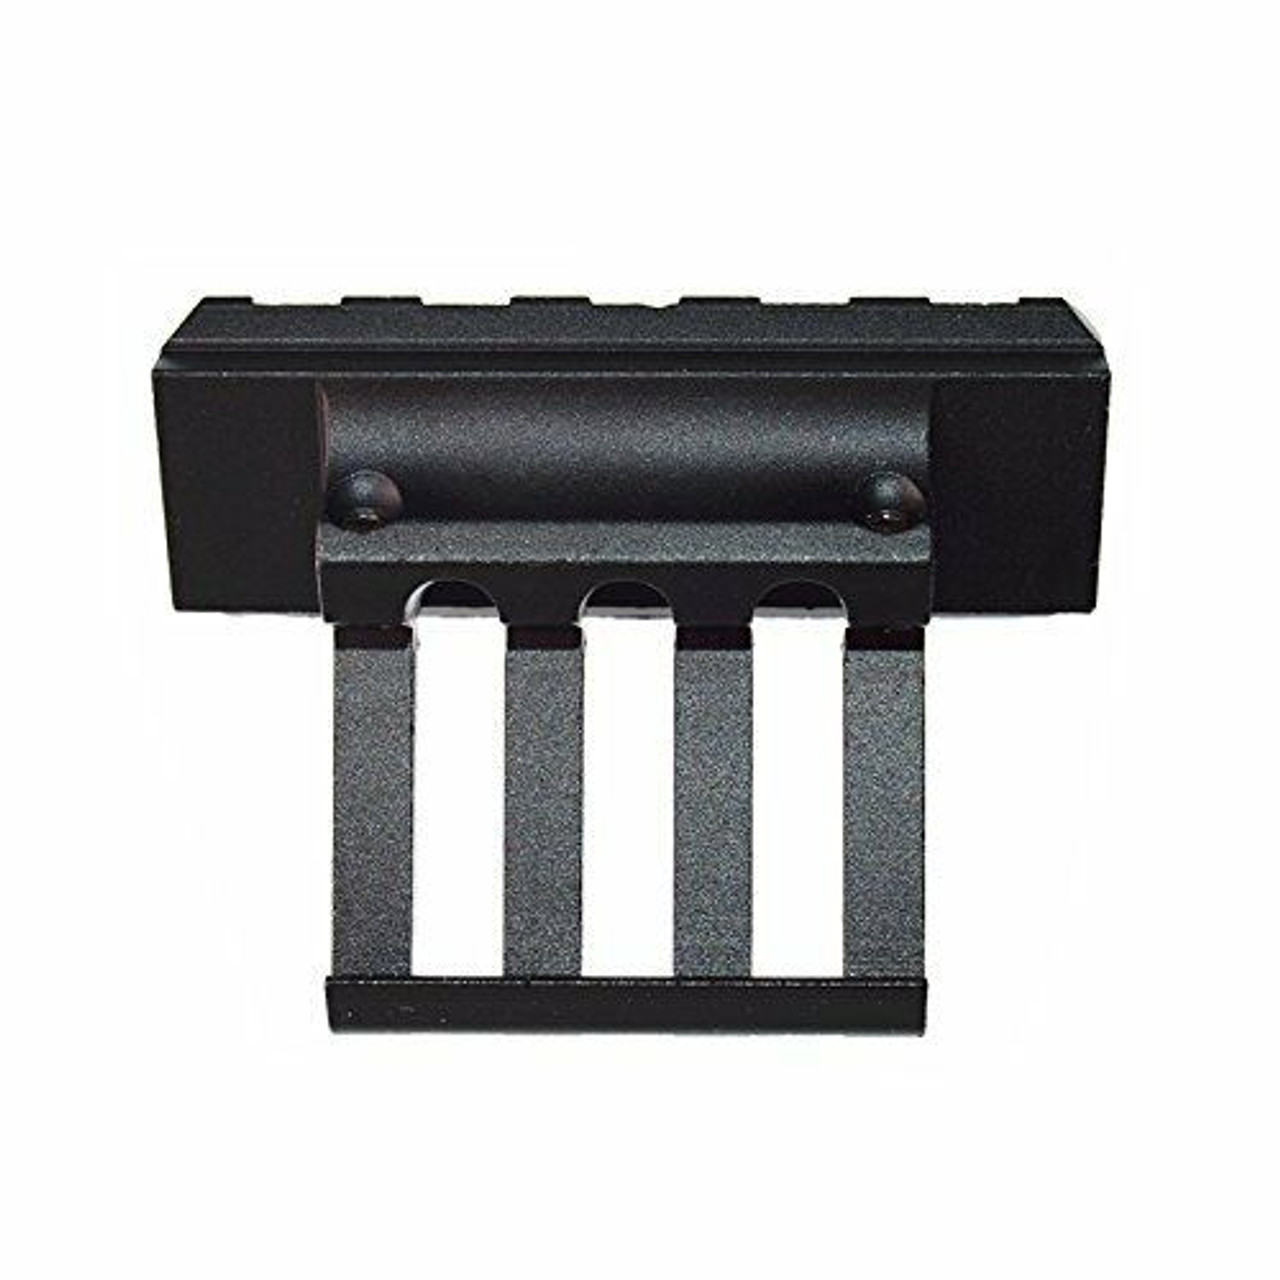 1×Low Profile Tactical 45 Degree Offset Angle Mount Picatinny Weaver Rail 